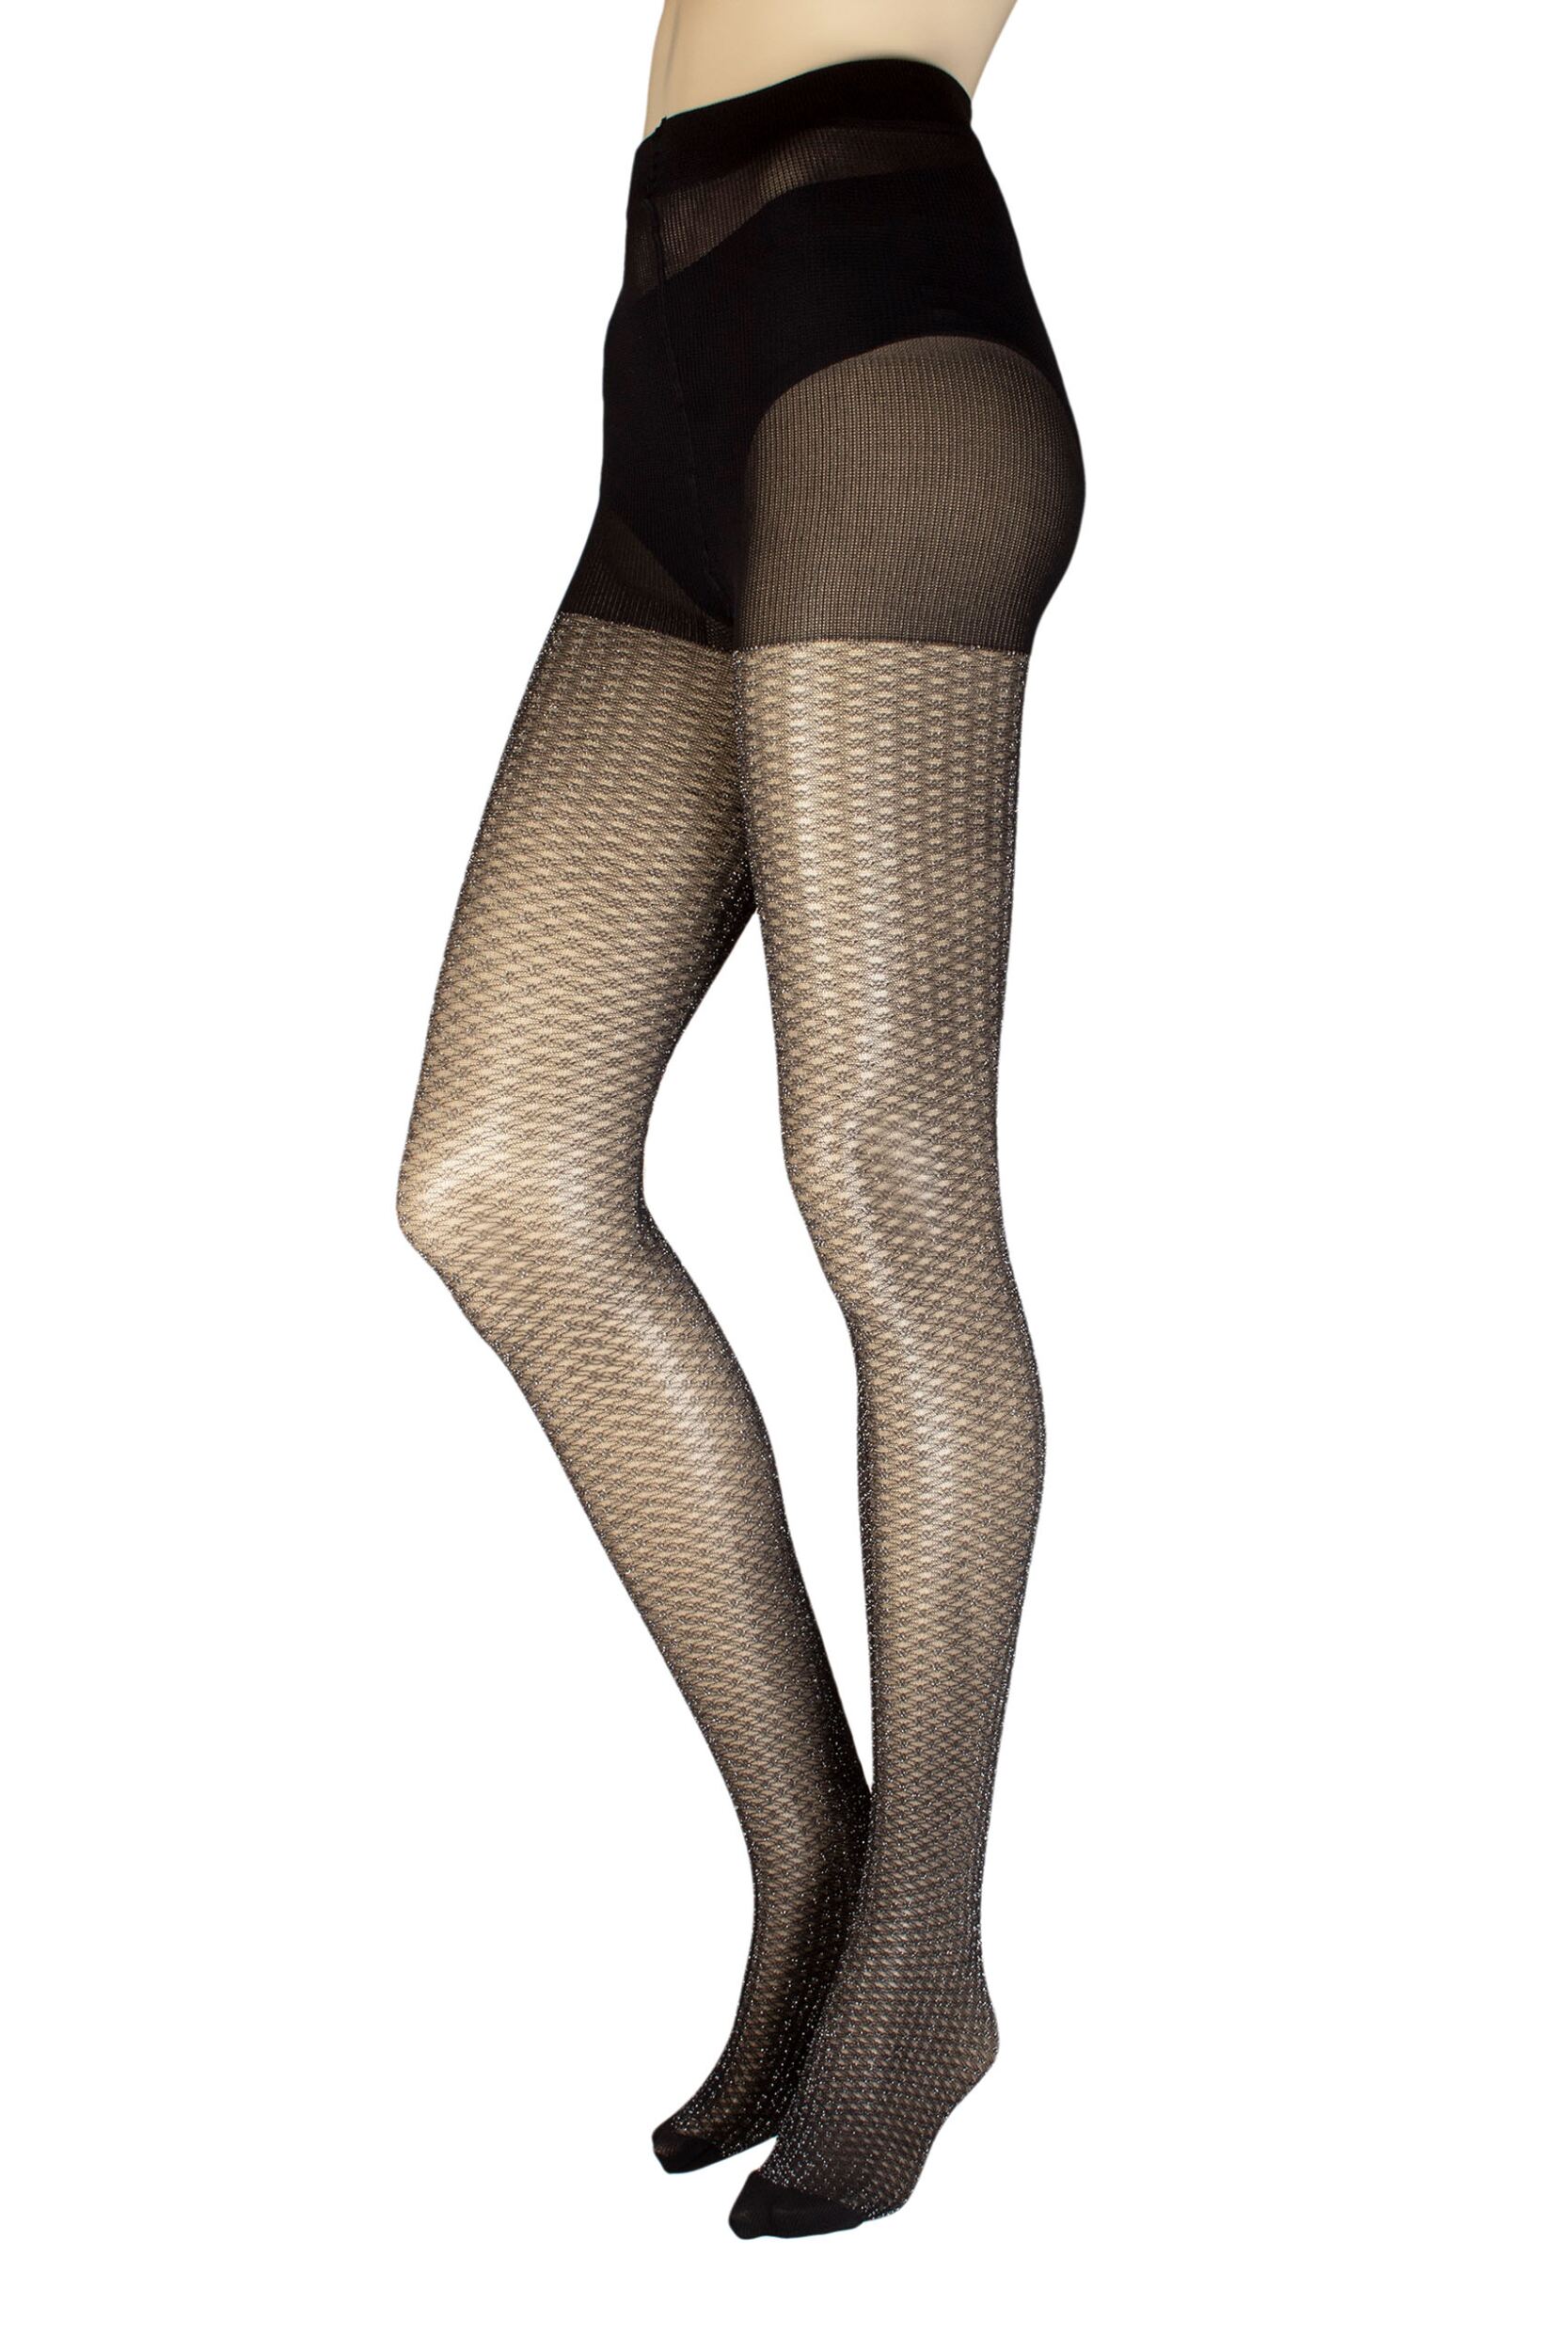 ladies 1 pair charnos all over sparkle tights black/silver m-l